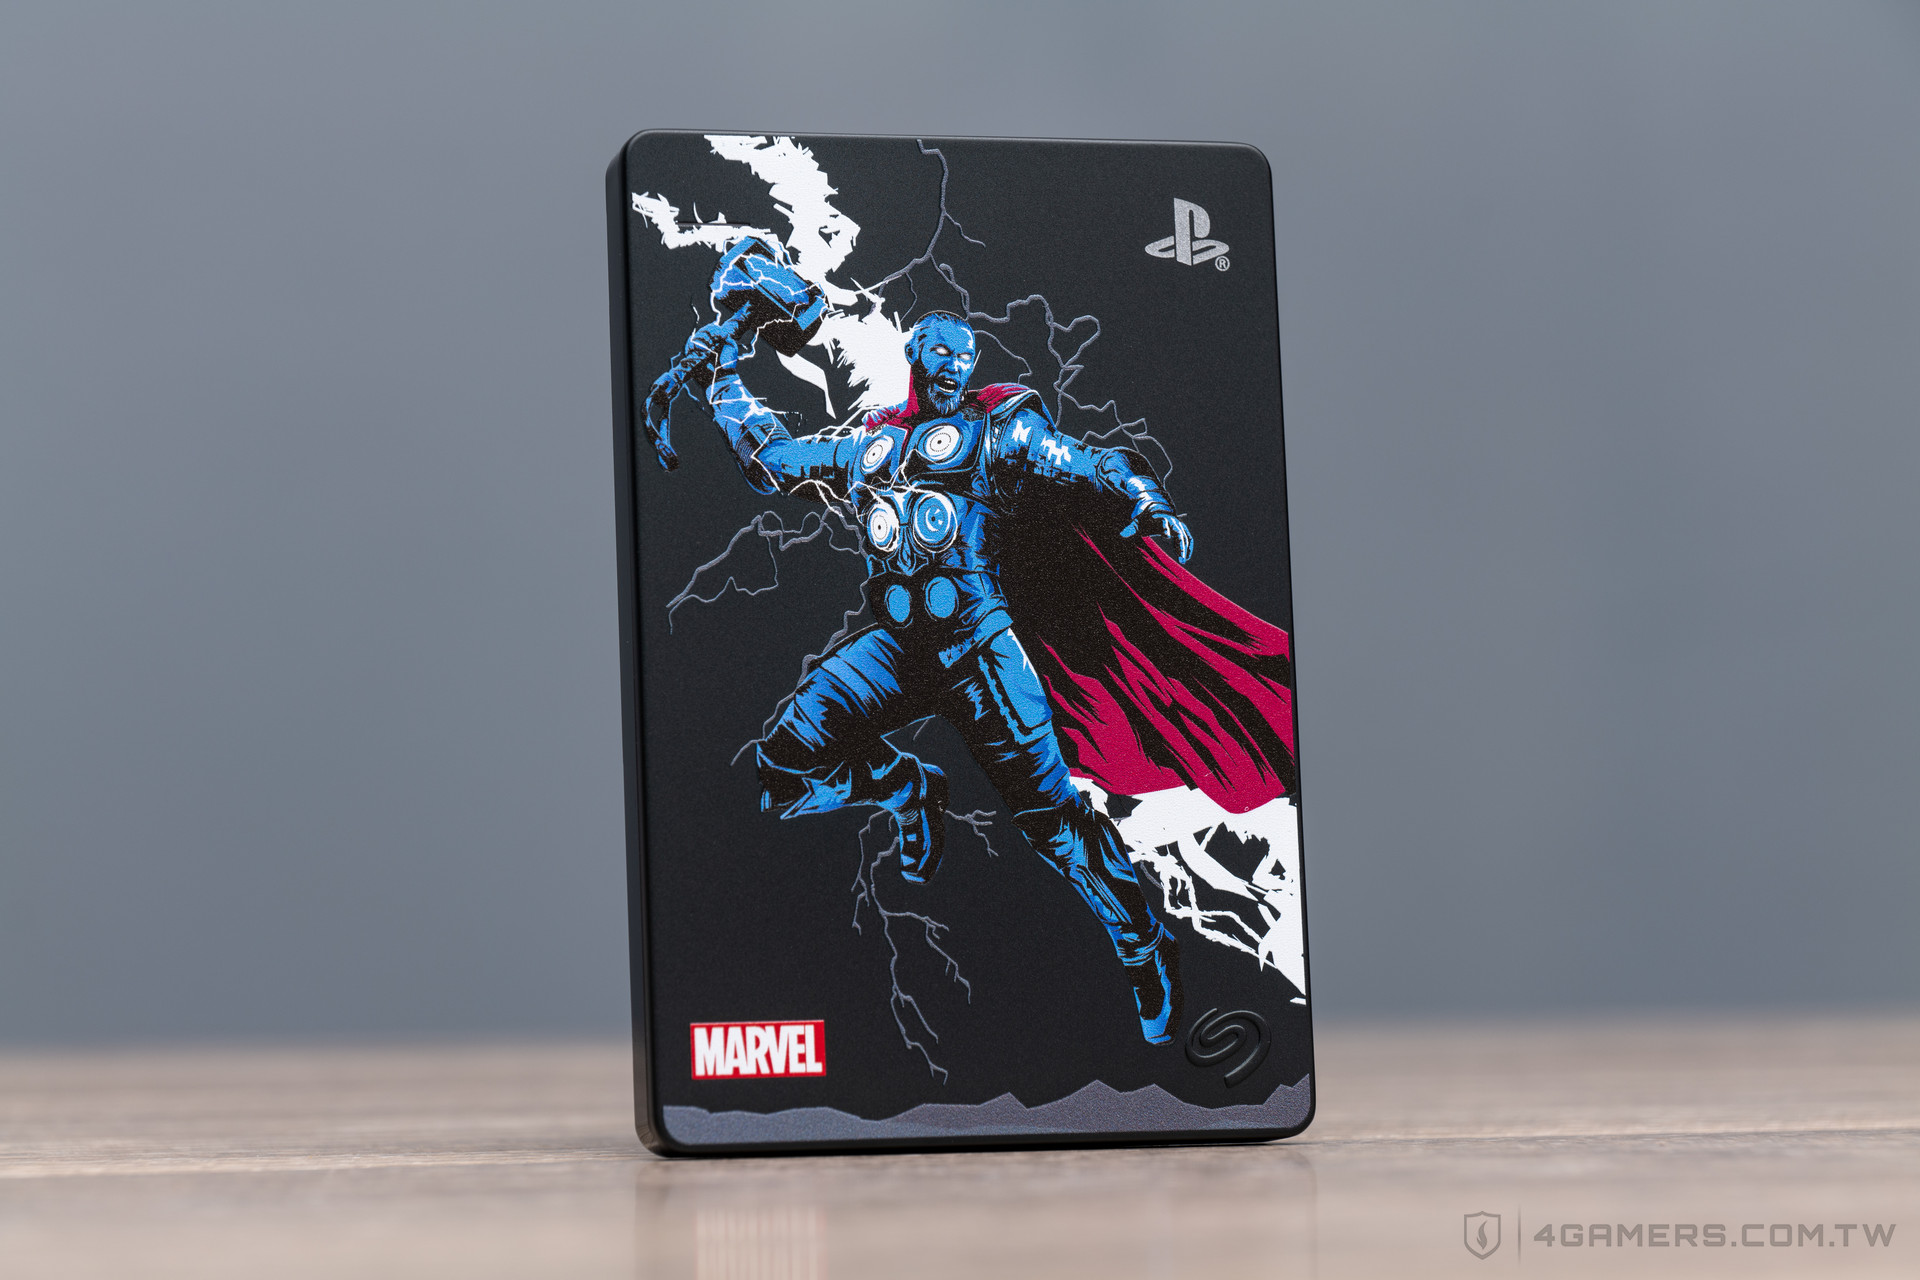 Seagate Game Drive for PS4 - Marvel's Avengers Limited Edition 漫威復仇者聯盟限定版